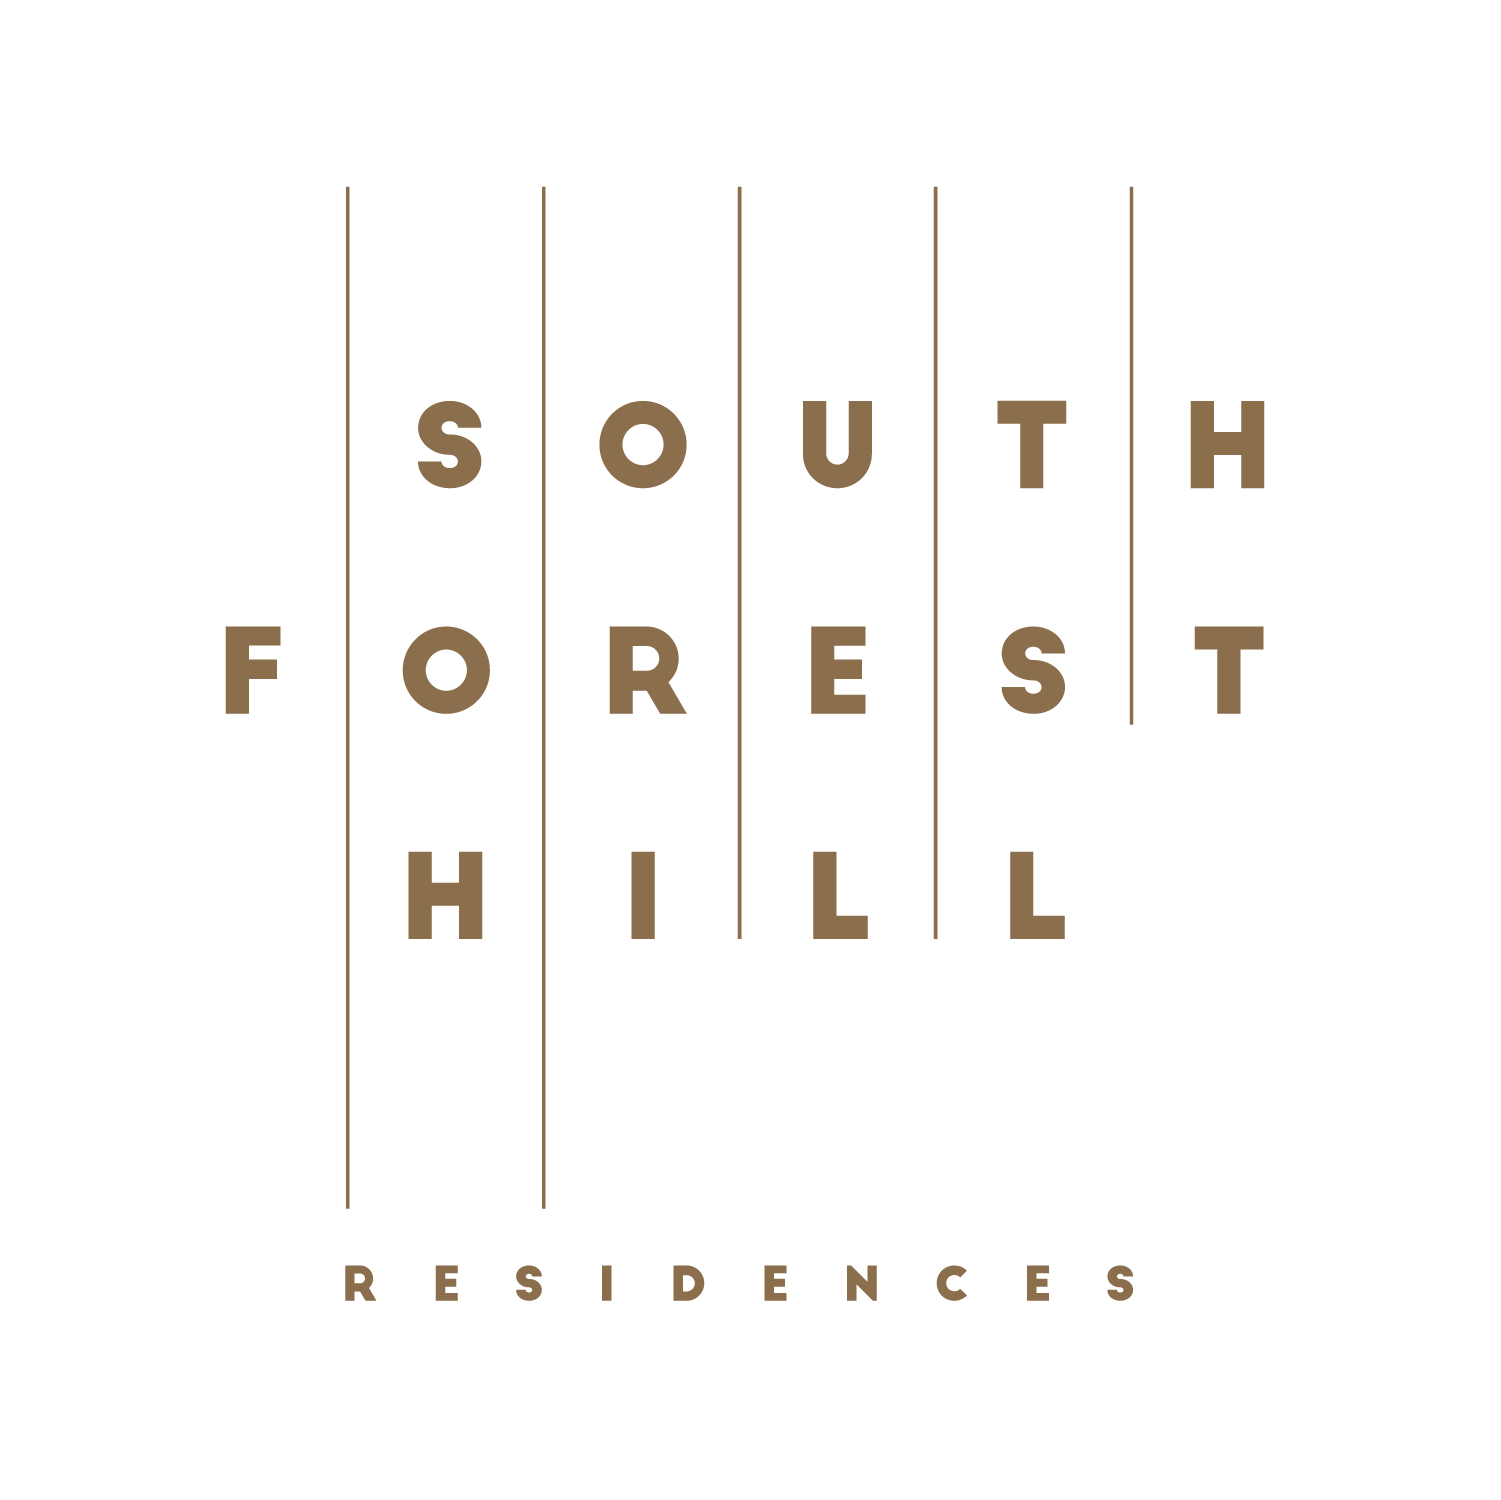 South Forest Hill